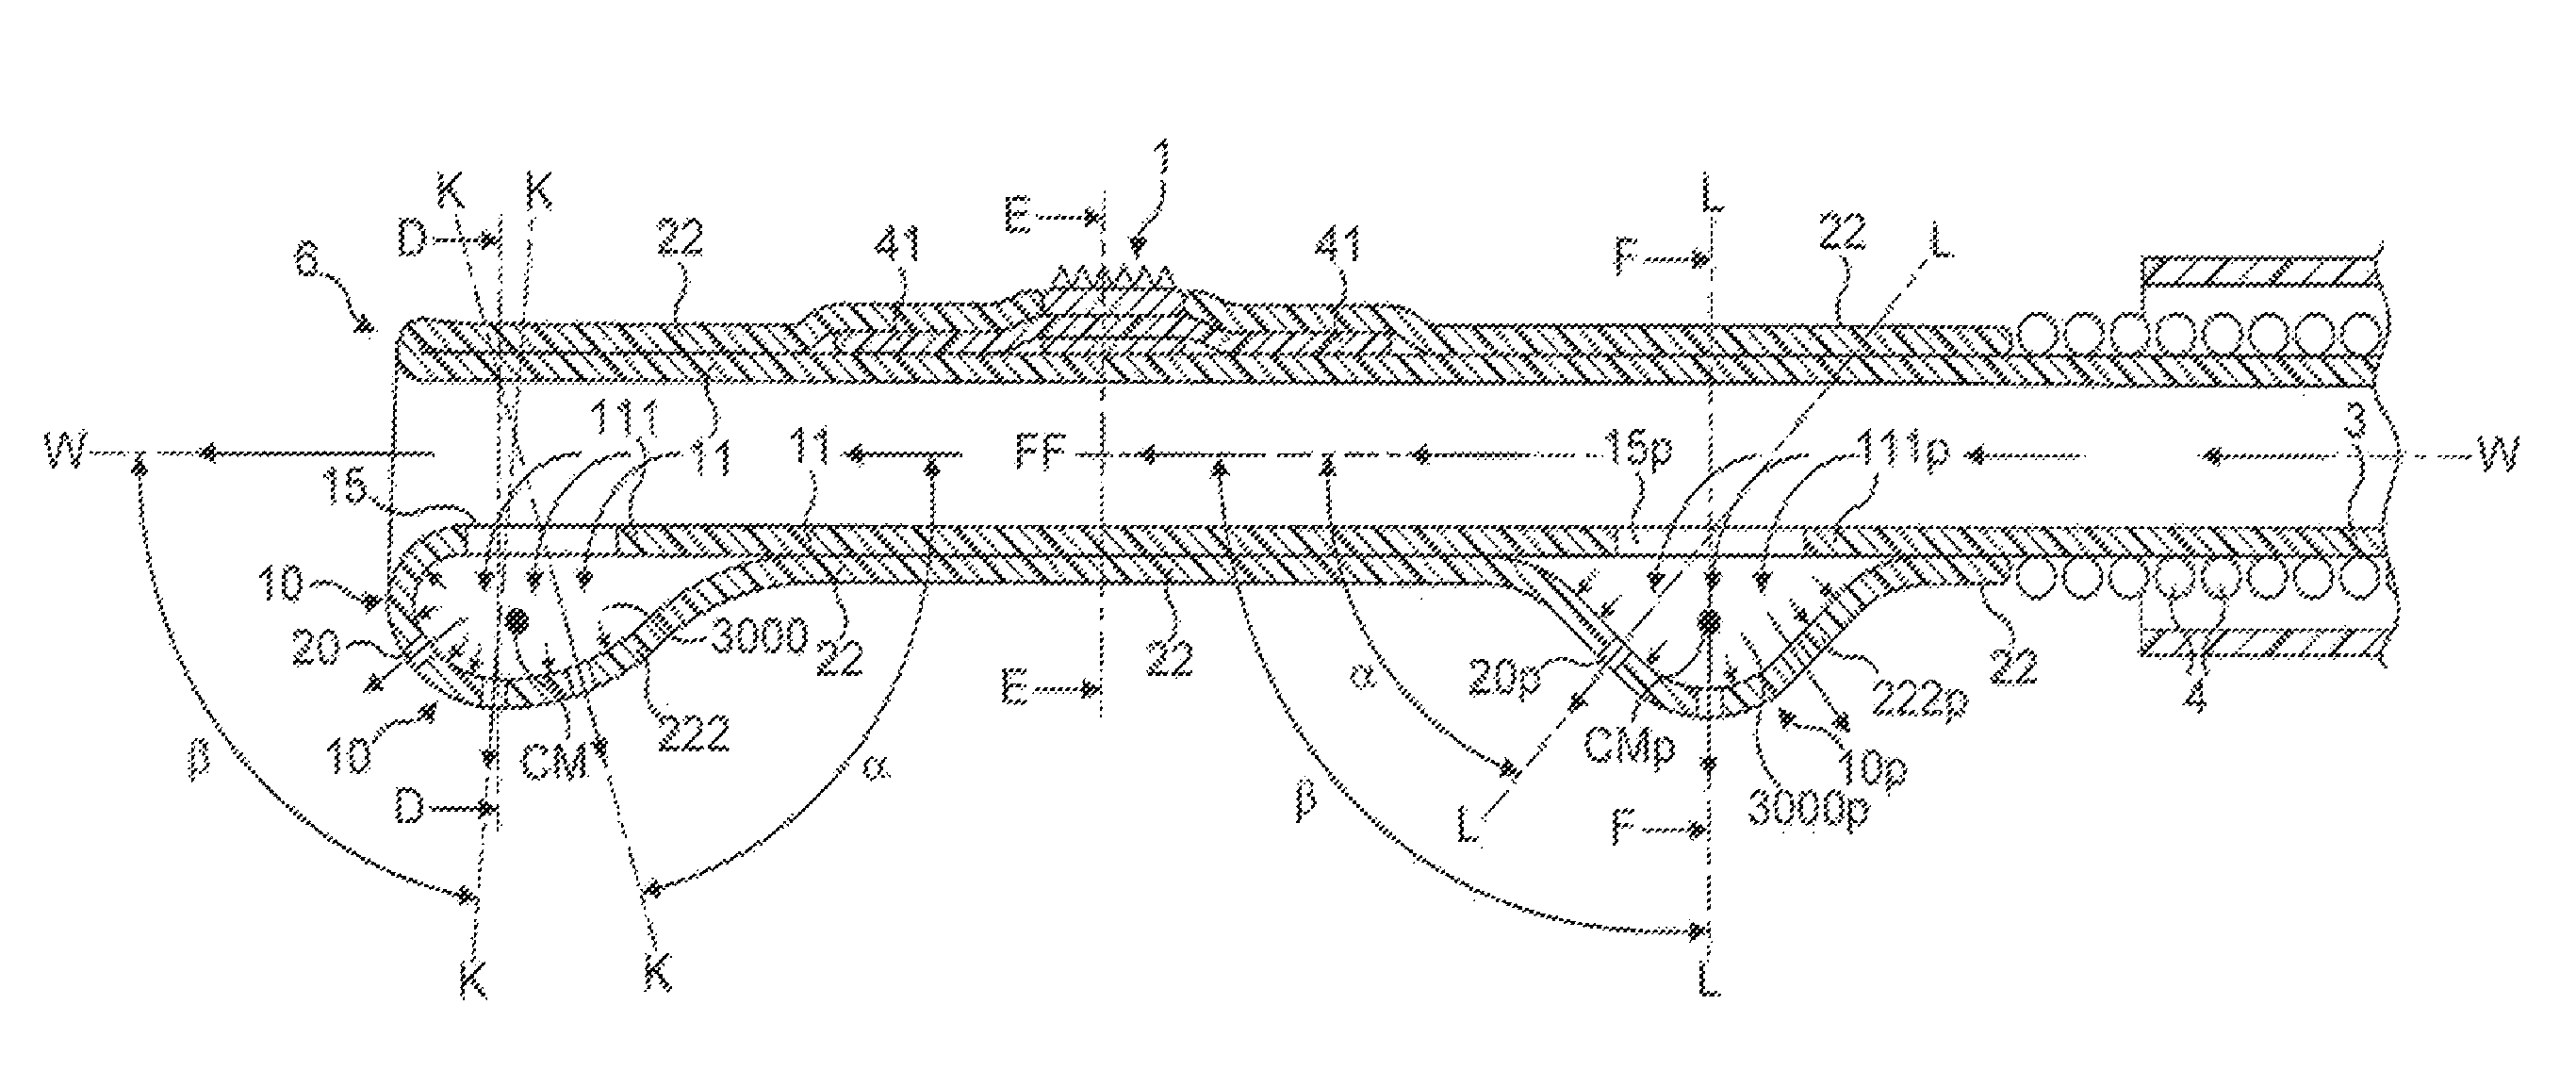 Rotational device with inflatable support elements and torque transmitting membrane